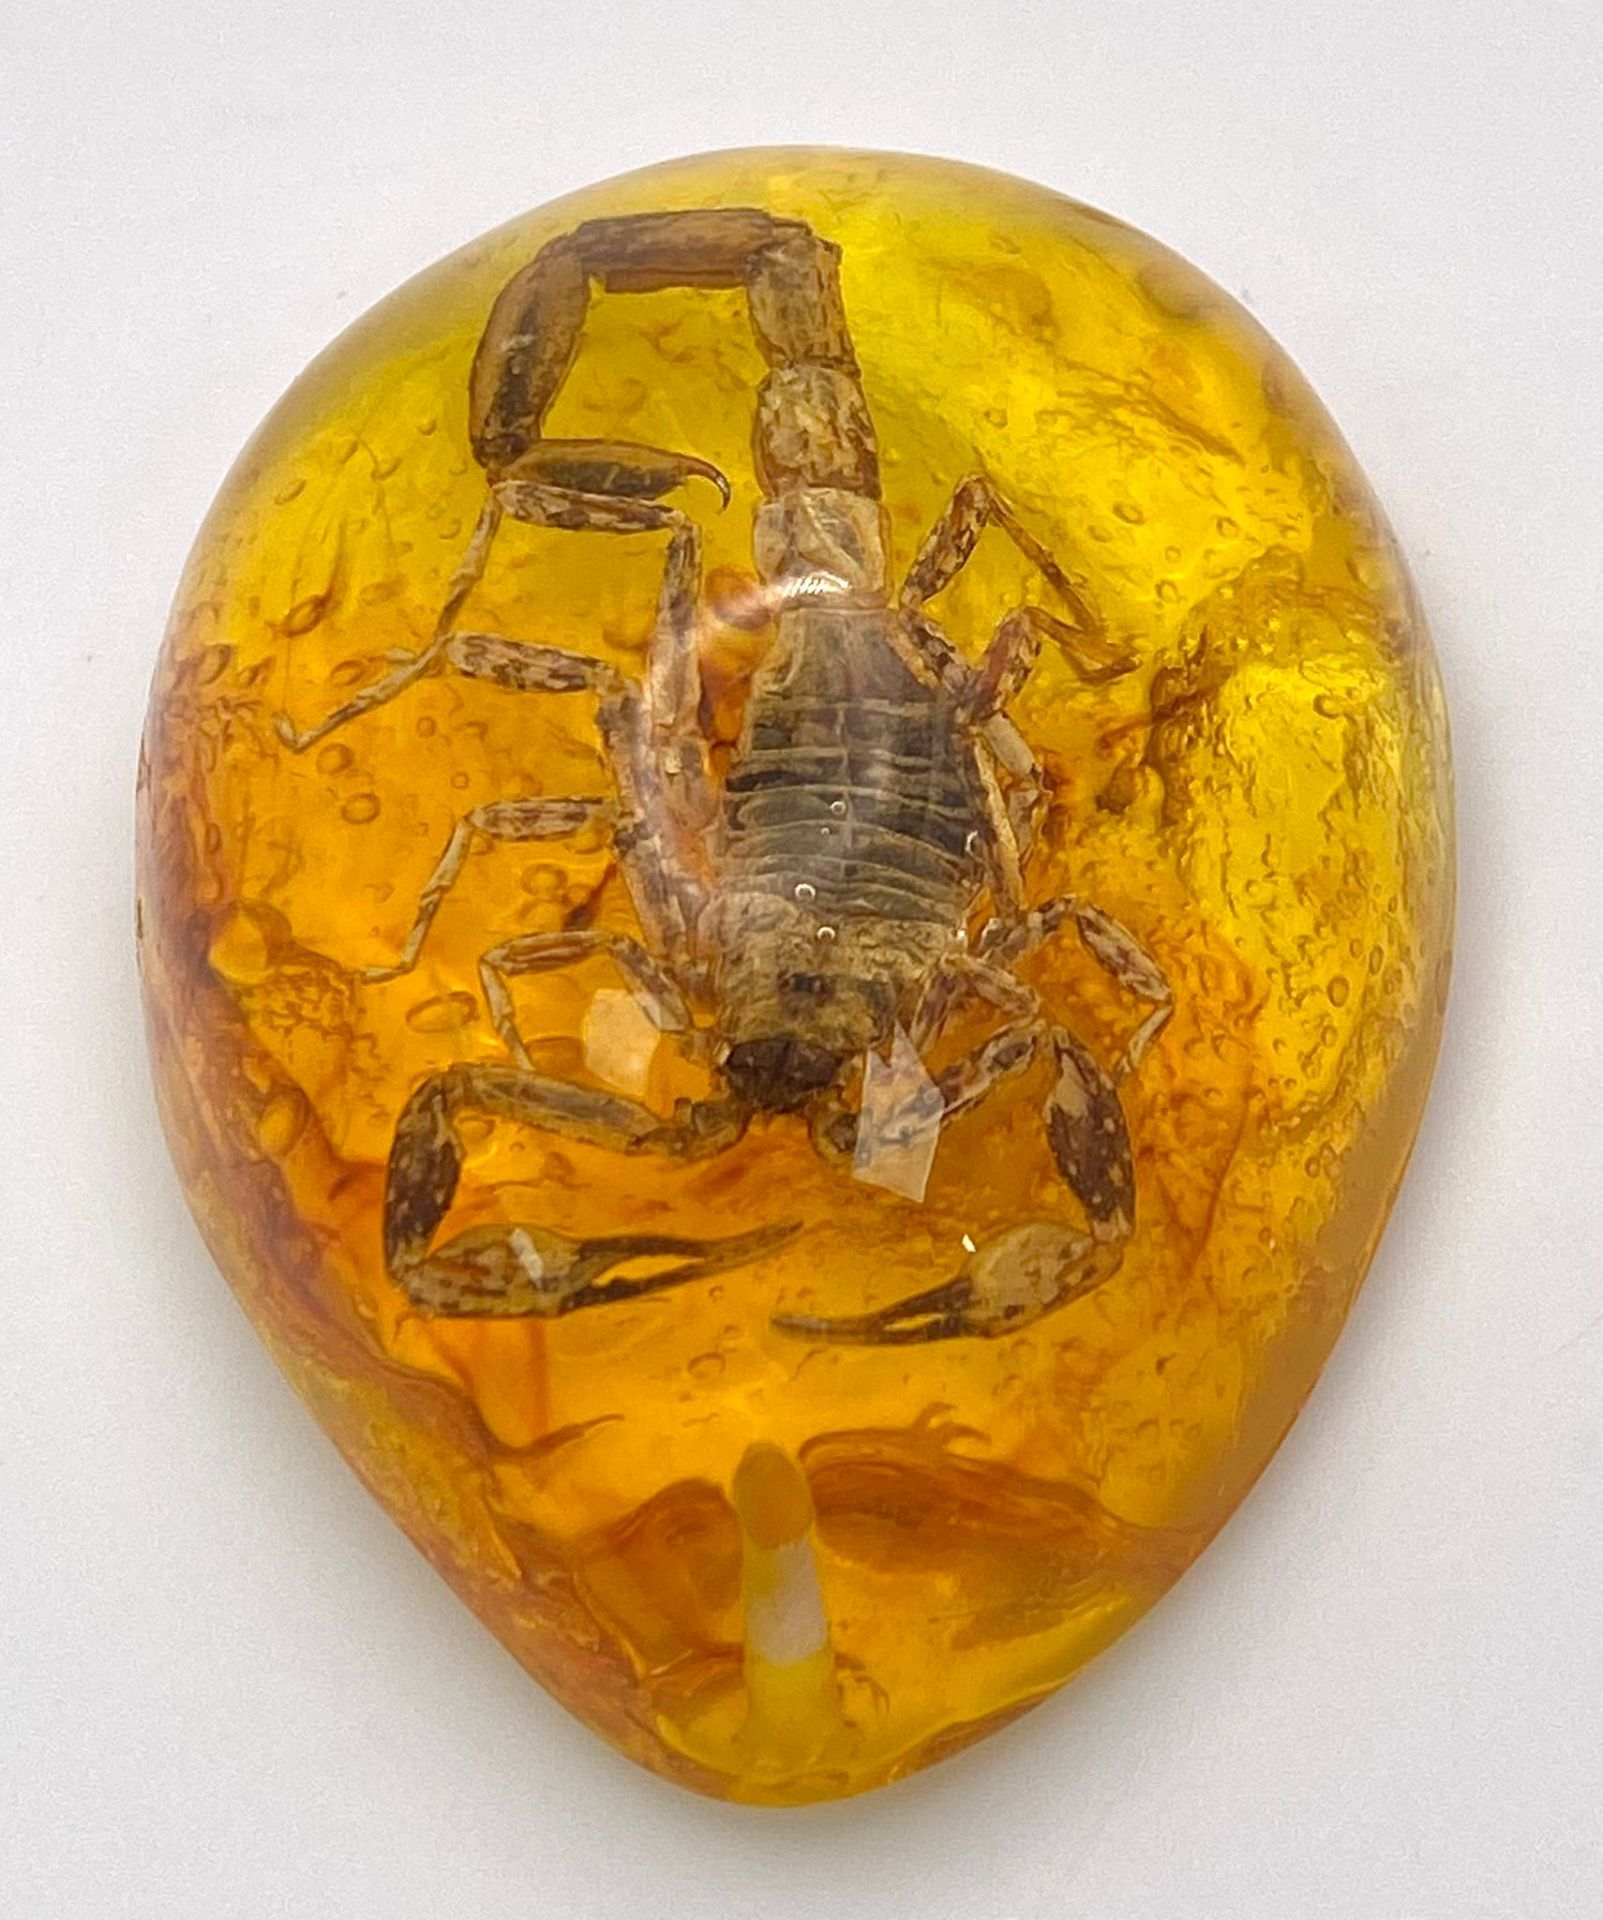 A Terrifying Scorpion Trapped in Amber Resin -Pendant/Paperweight. 6cm - Image 2 of 3